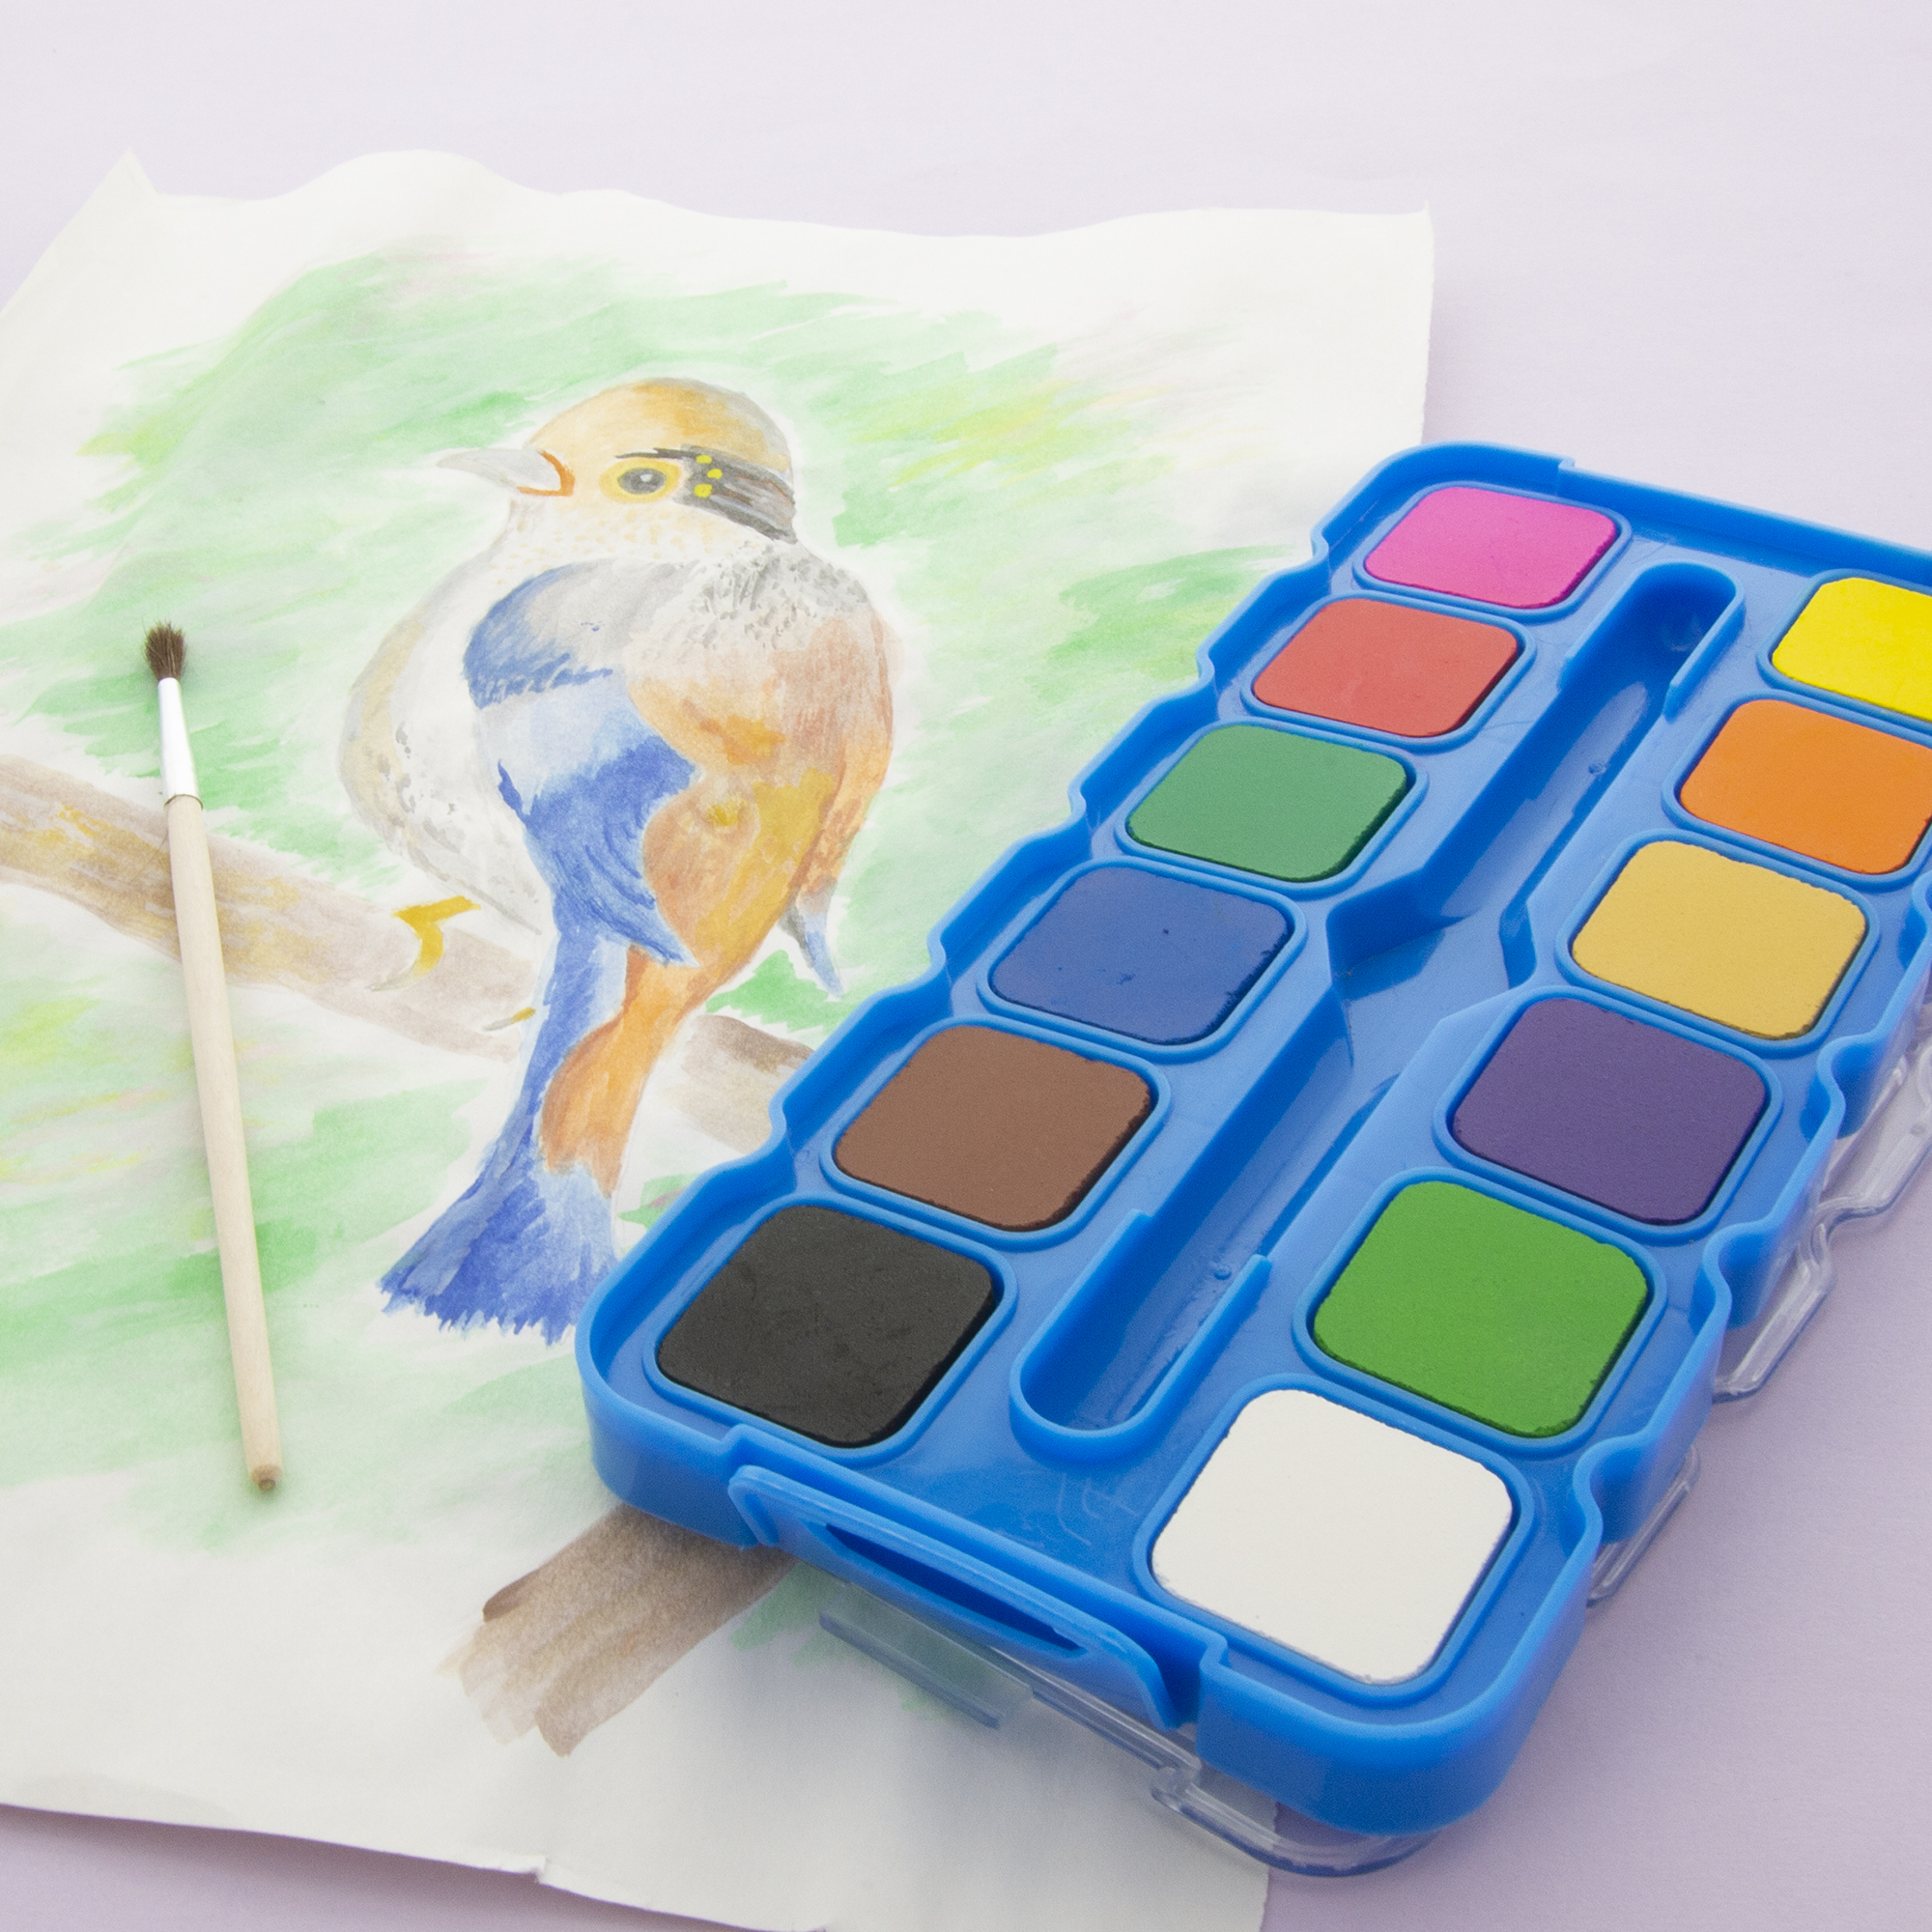 Ice Cube Tray Watercolor Palette. Creative art supplies from